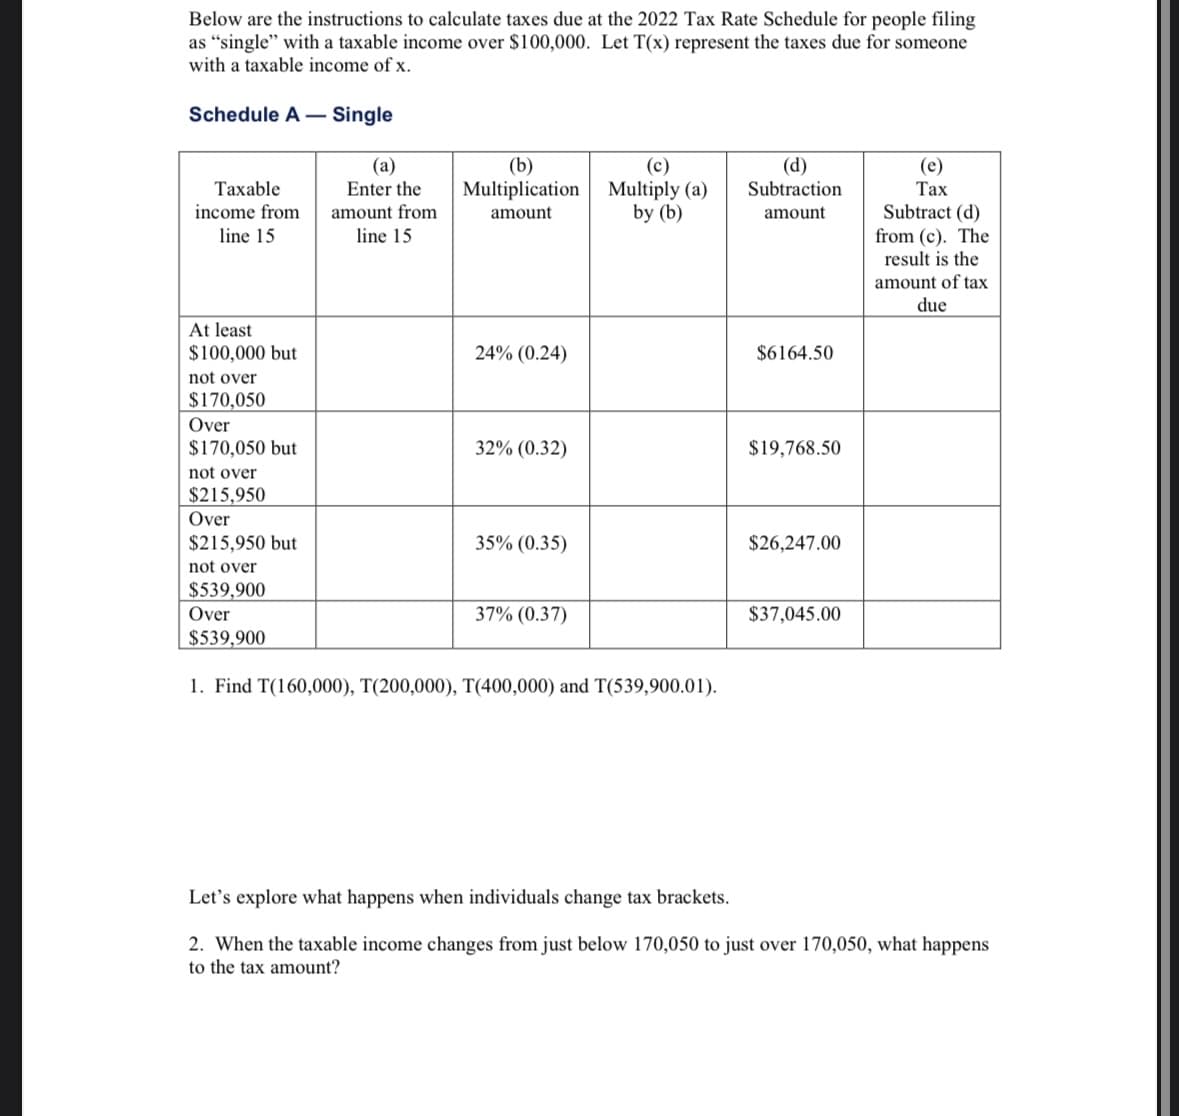 Below are the instructions to calculate taxes due at the 2022 Tax Rate Schedule for people filing
as "single" with a taxable income over $100,000. Let T(x) represent the taxes due for someone
with a taxable income of x.
Schedule A - Single
Taxable
income from
line 15
At least
$100,000 but
not over
$170,050
Over
$170,050 but
not over
$215,950
Over
$215,950 but
not over
$539,900
Over
$539,900
(a)
Enter the
amount from
line 15
(b)
Multiplication
amount
24% (0.24)
32% (0.32)
35% (0.35)
37% (0.37)
(c)
Multiply (a)
by (b)
1. Find T(160,000), T(200,000), T(400,000) and T(539,900.01).
(d)
Subtraction
amount
$6164.50
$19,768.50
$26,247.00
$37,045.00
(e)
Tax
Subtract (d)
from (c). The
result is the
amount of tax
due
Let's explore what happens when individuals change tax brackets.
2. When the taxable income changes from just below 170,050 to just over 170,050, what happens
to the tax amount?